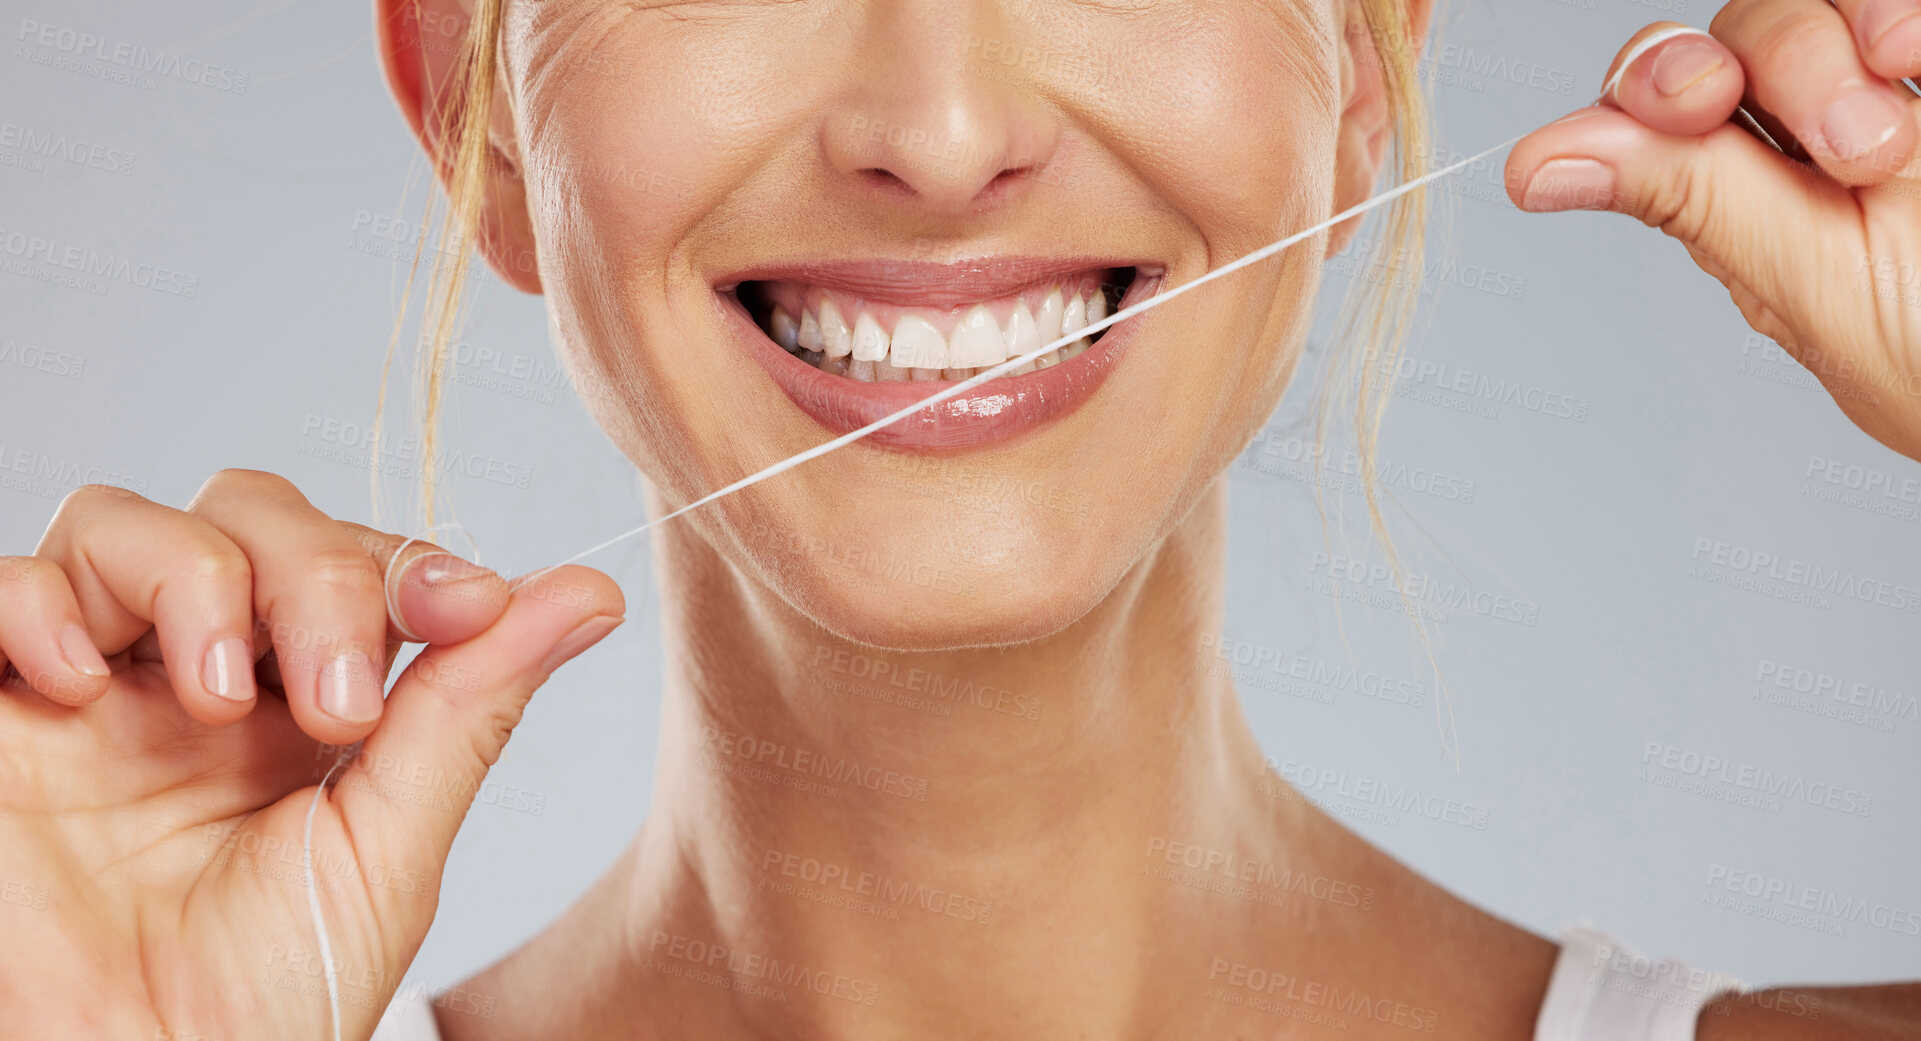 Buy stock photo Teeth flossing, dental wellness and woman with smile while cleaning mouth against grey mockup studio background. Hands of model with string to care for tooth health and oral healthcare with smile